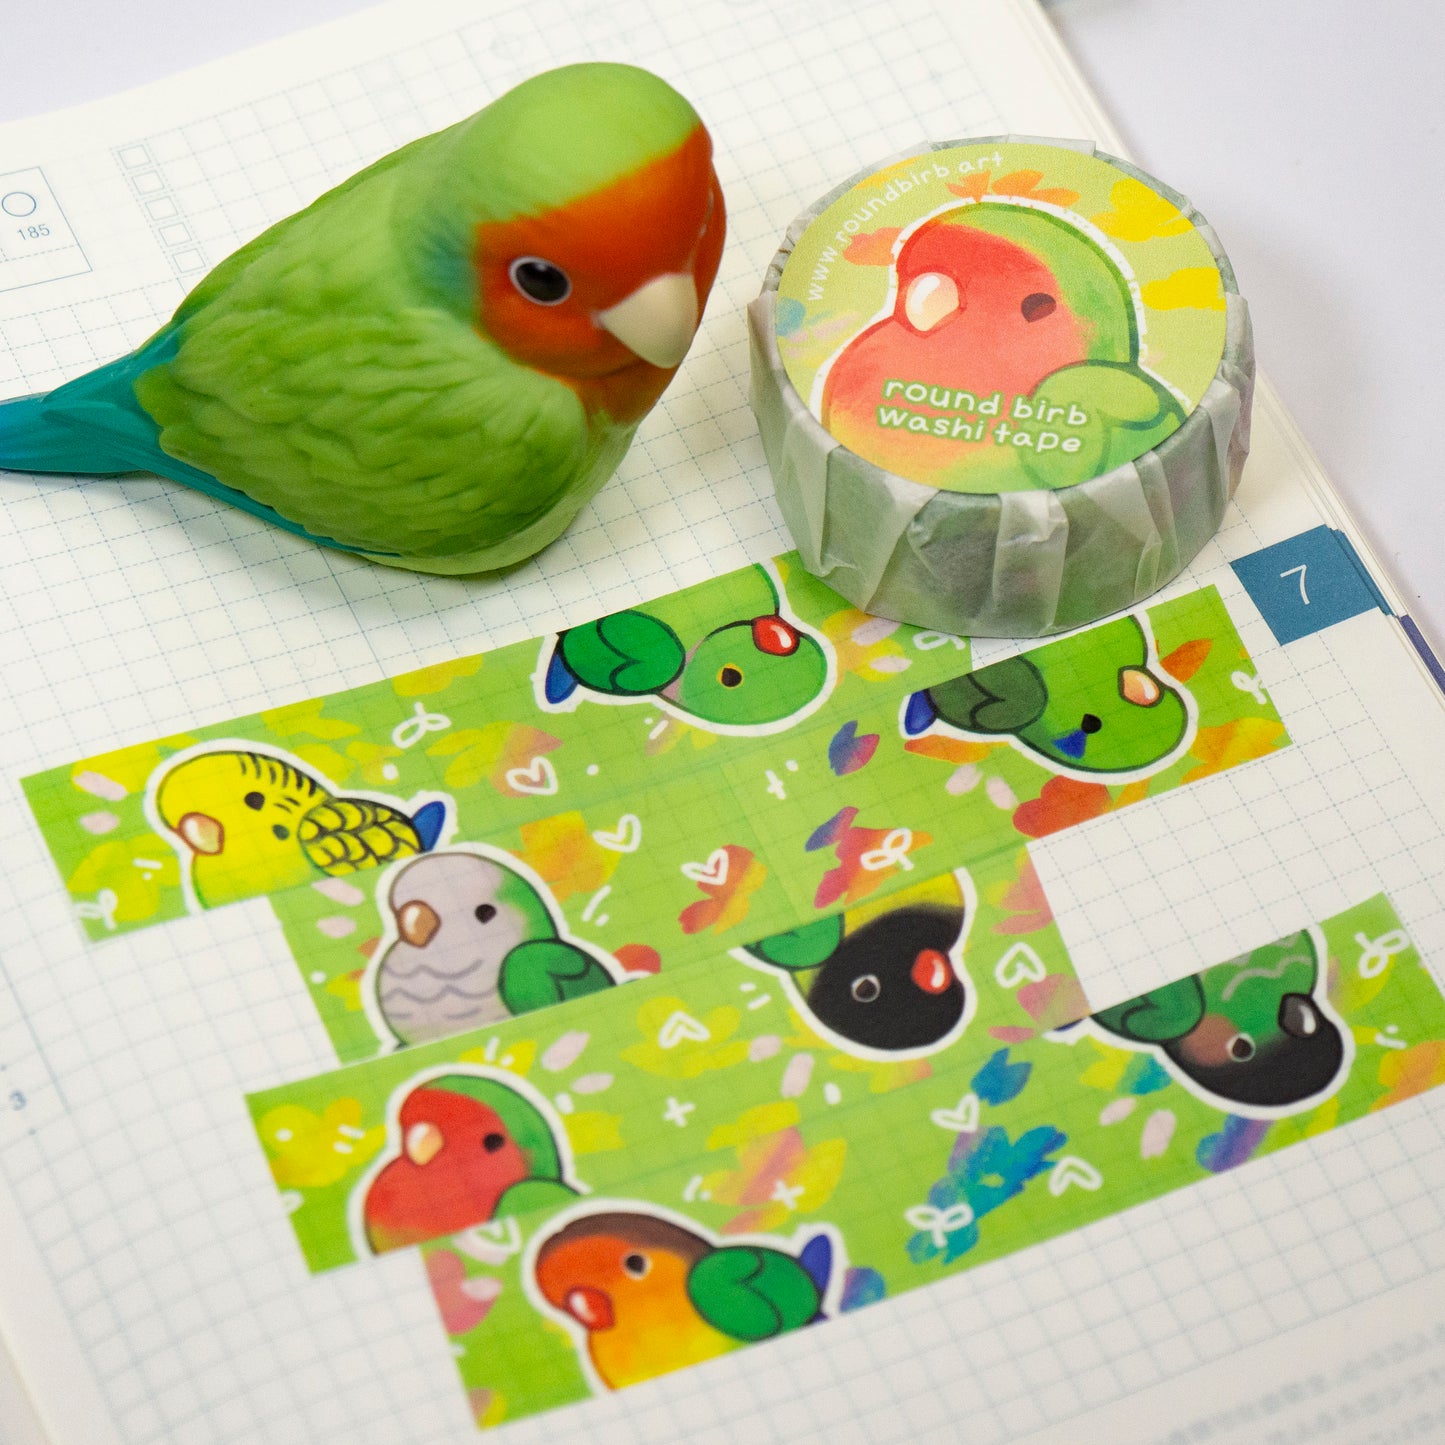 Round Green Parrots Washi Tape